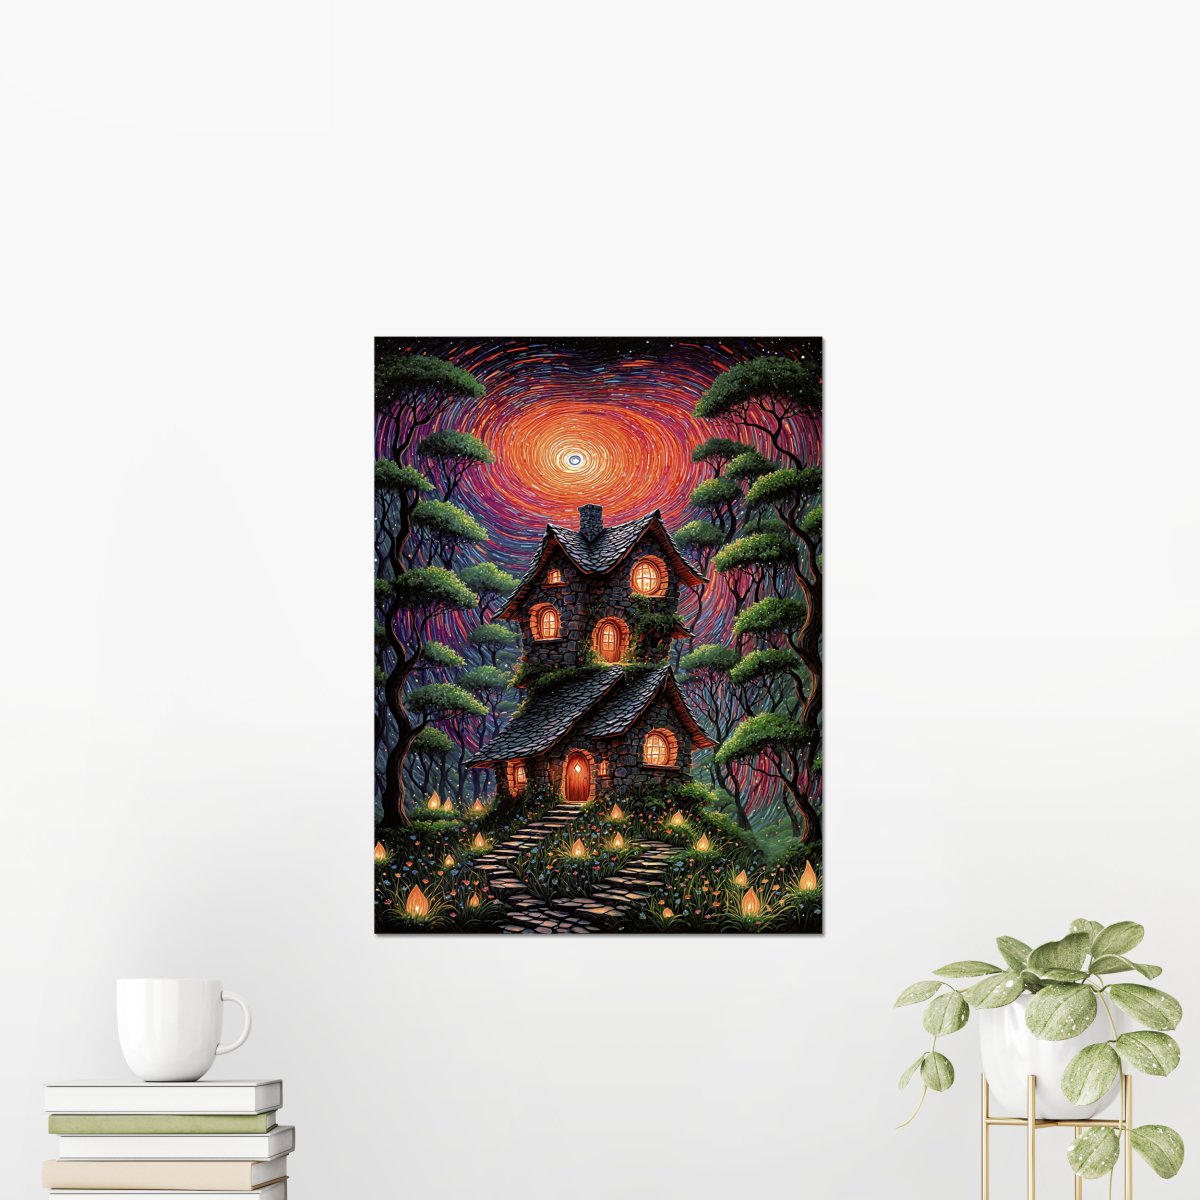 Waxy hex hut - Art print - Poster - Ever colorful